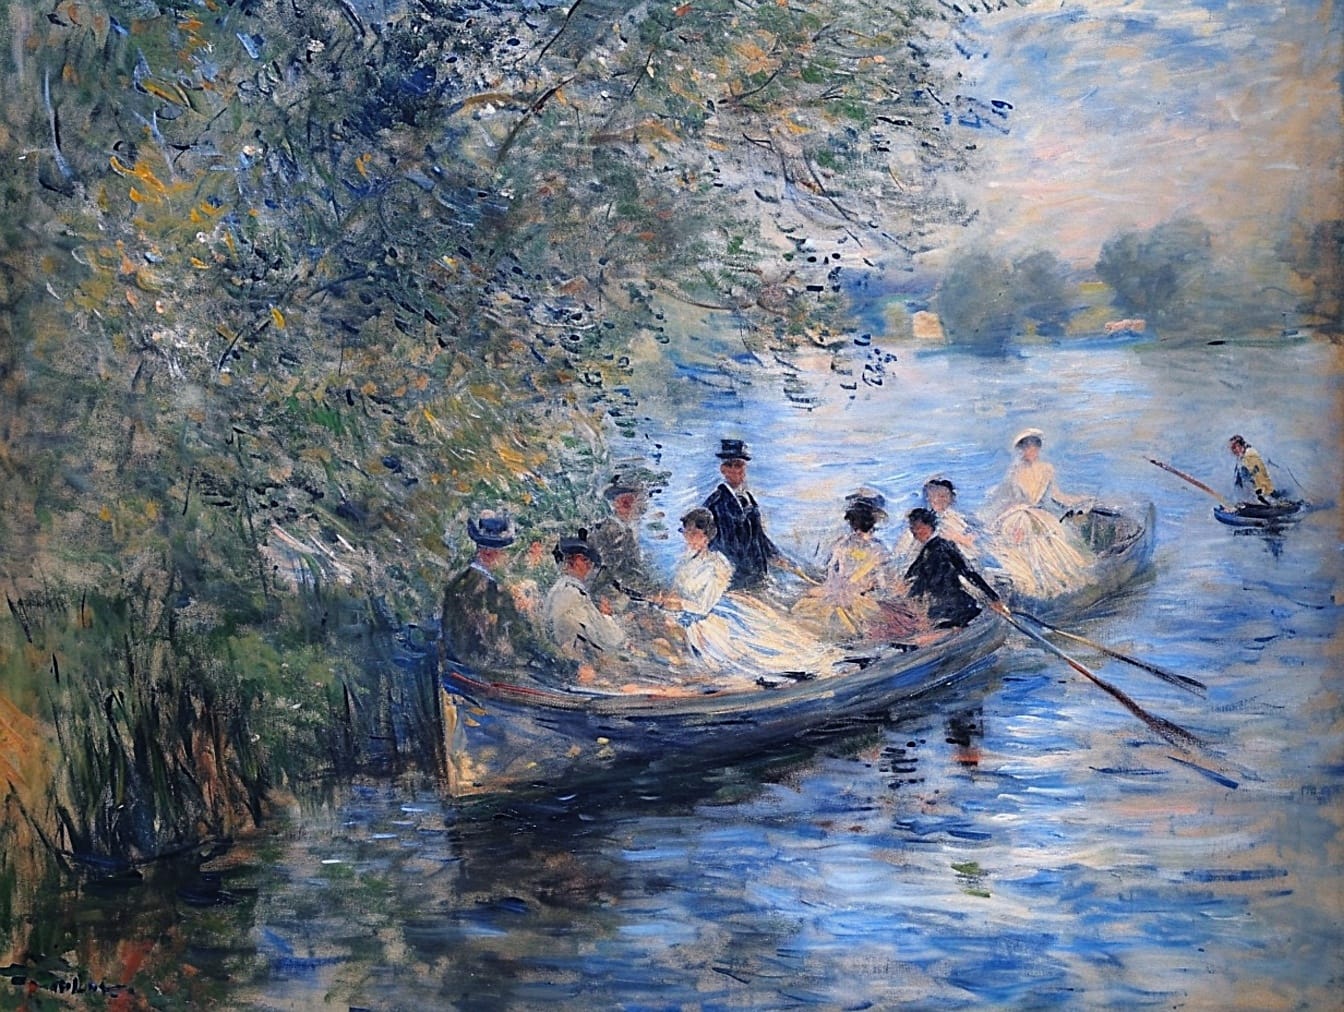 Oil painting of a group of people rowing a boat depicting lifestyle of wealthy people in 19th century